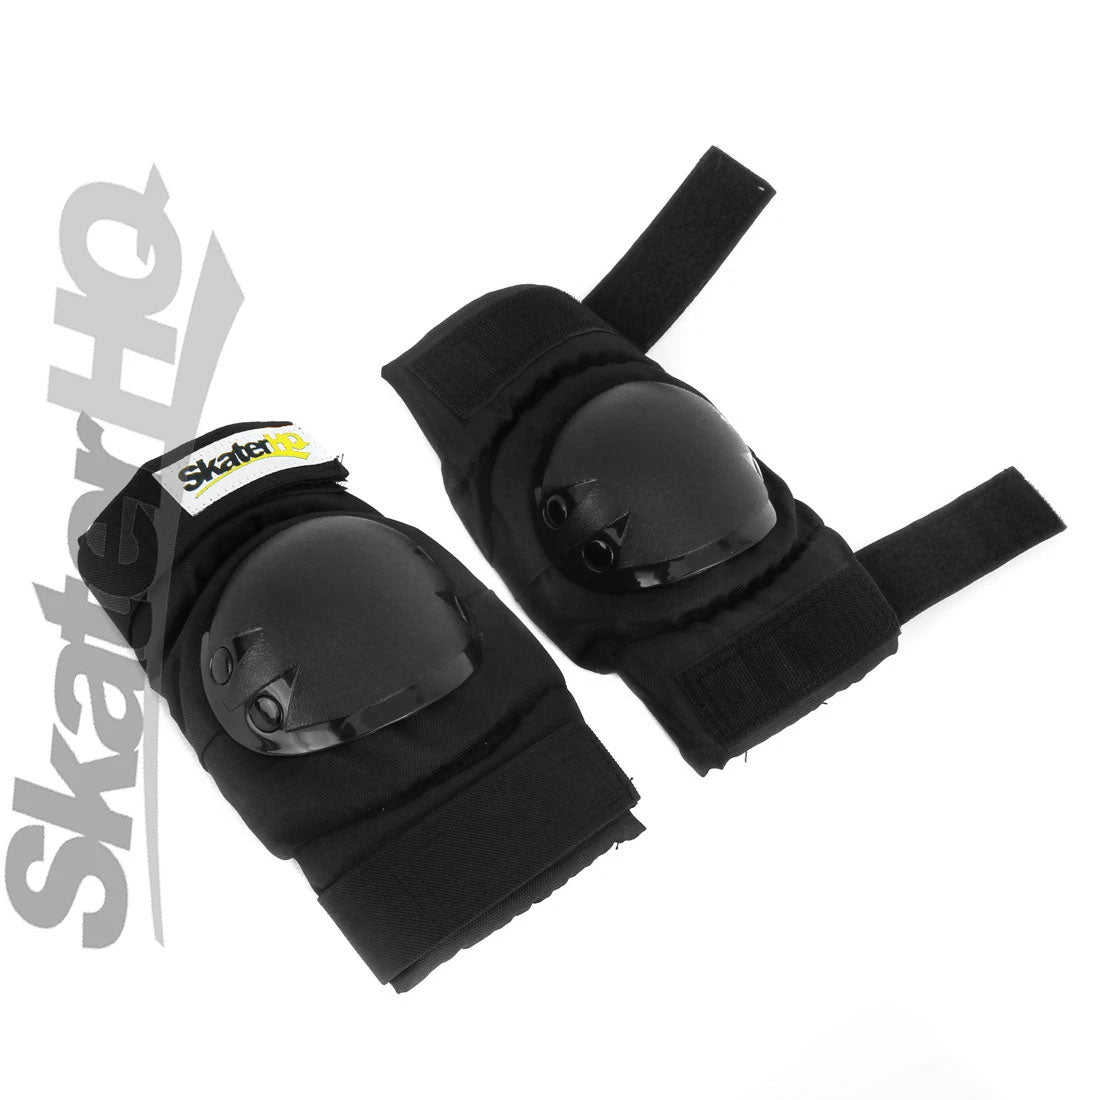 Skater HQ Knee/Elbow Set - XLarge Protective Gear